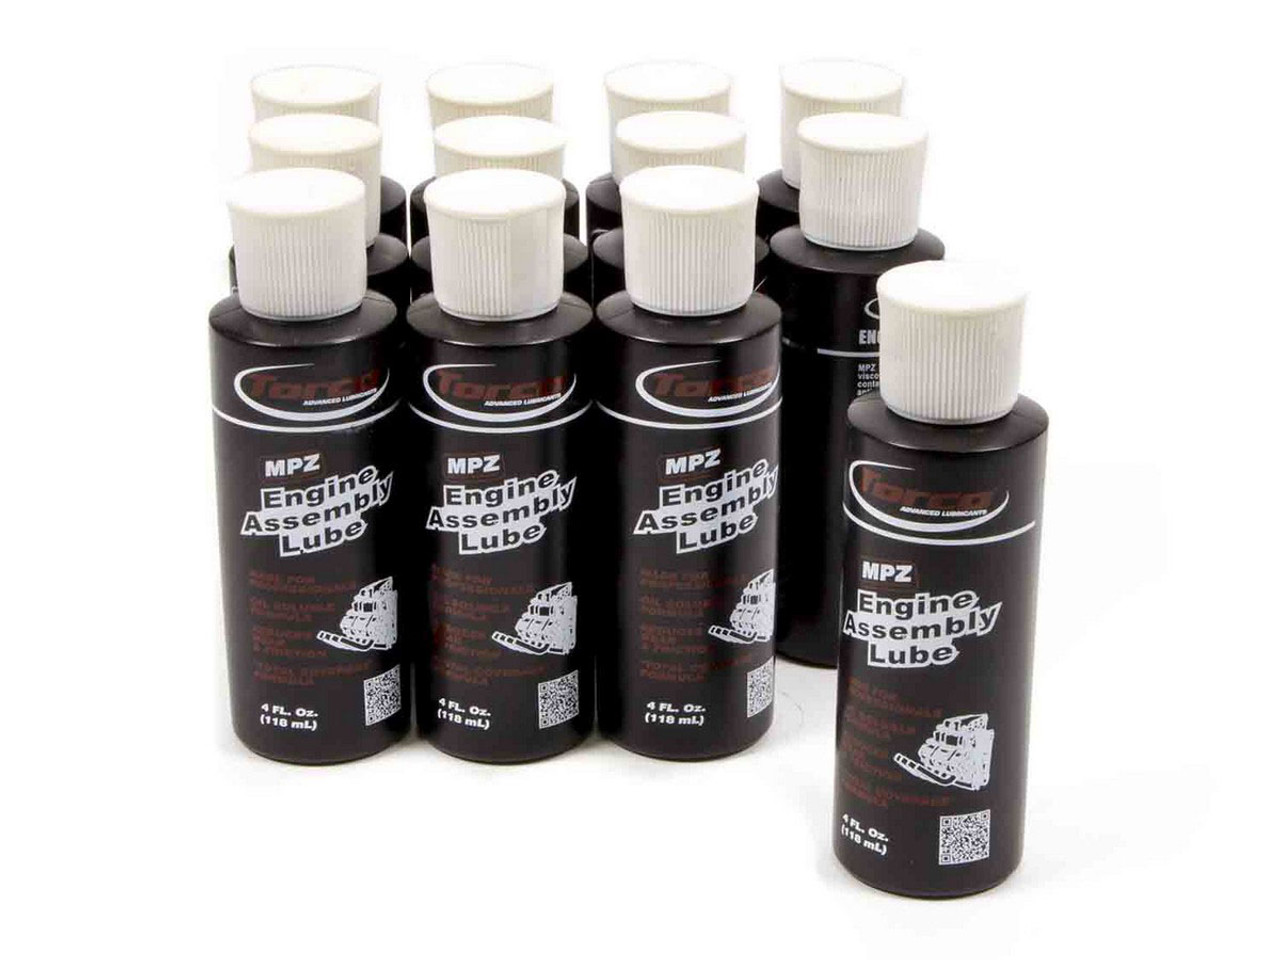 Torco MPZ Engine Assembly Lube Case/12-4oz Bottle - TRCA550055J